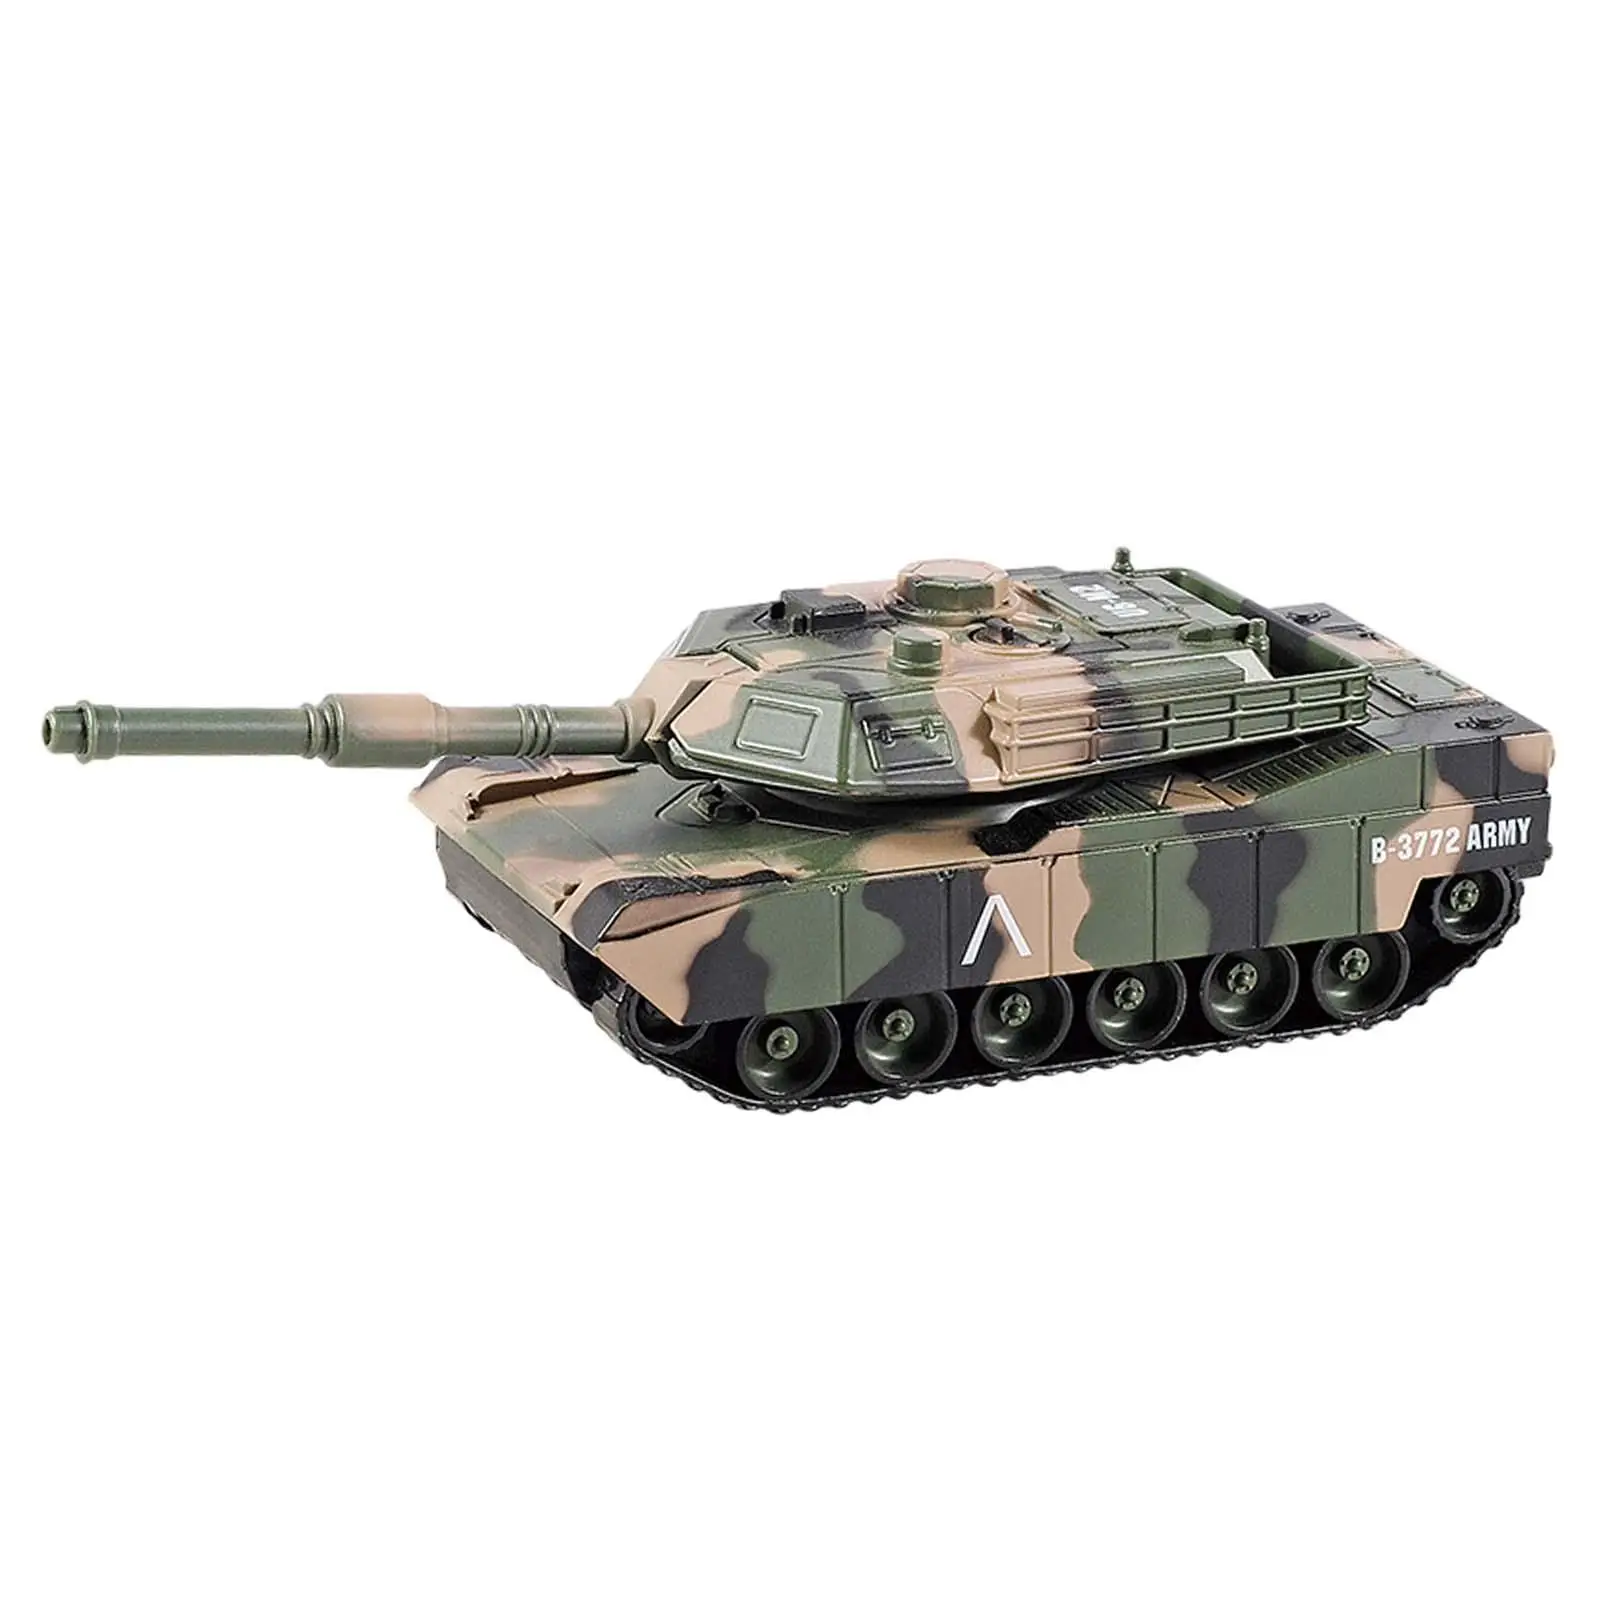 1/24 Tank Toy Creative Educational Toys Vehicle Pullback Motion Realistic Alloy Diecast Tank for Kids Boys Girls Birthday Gift